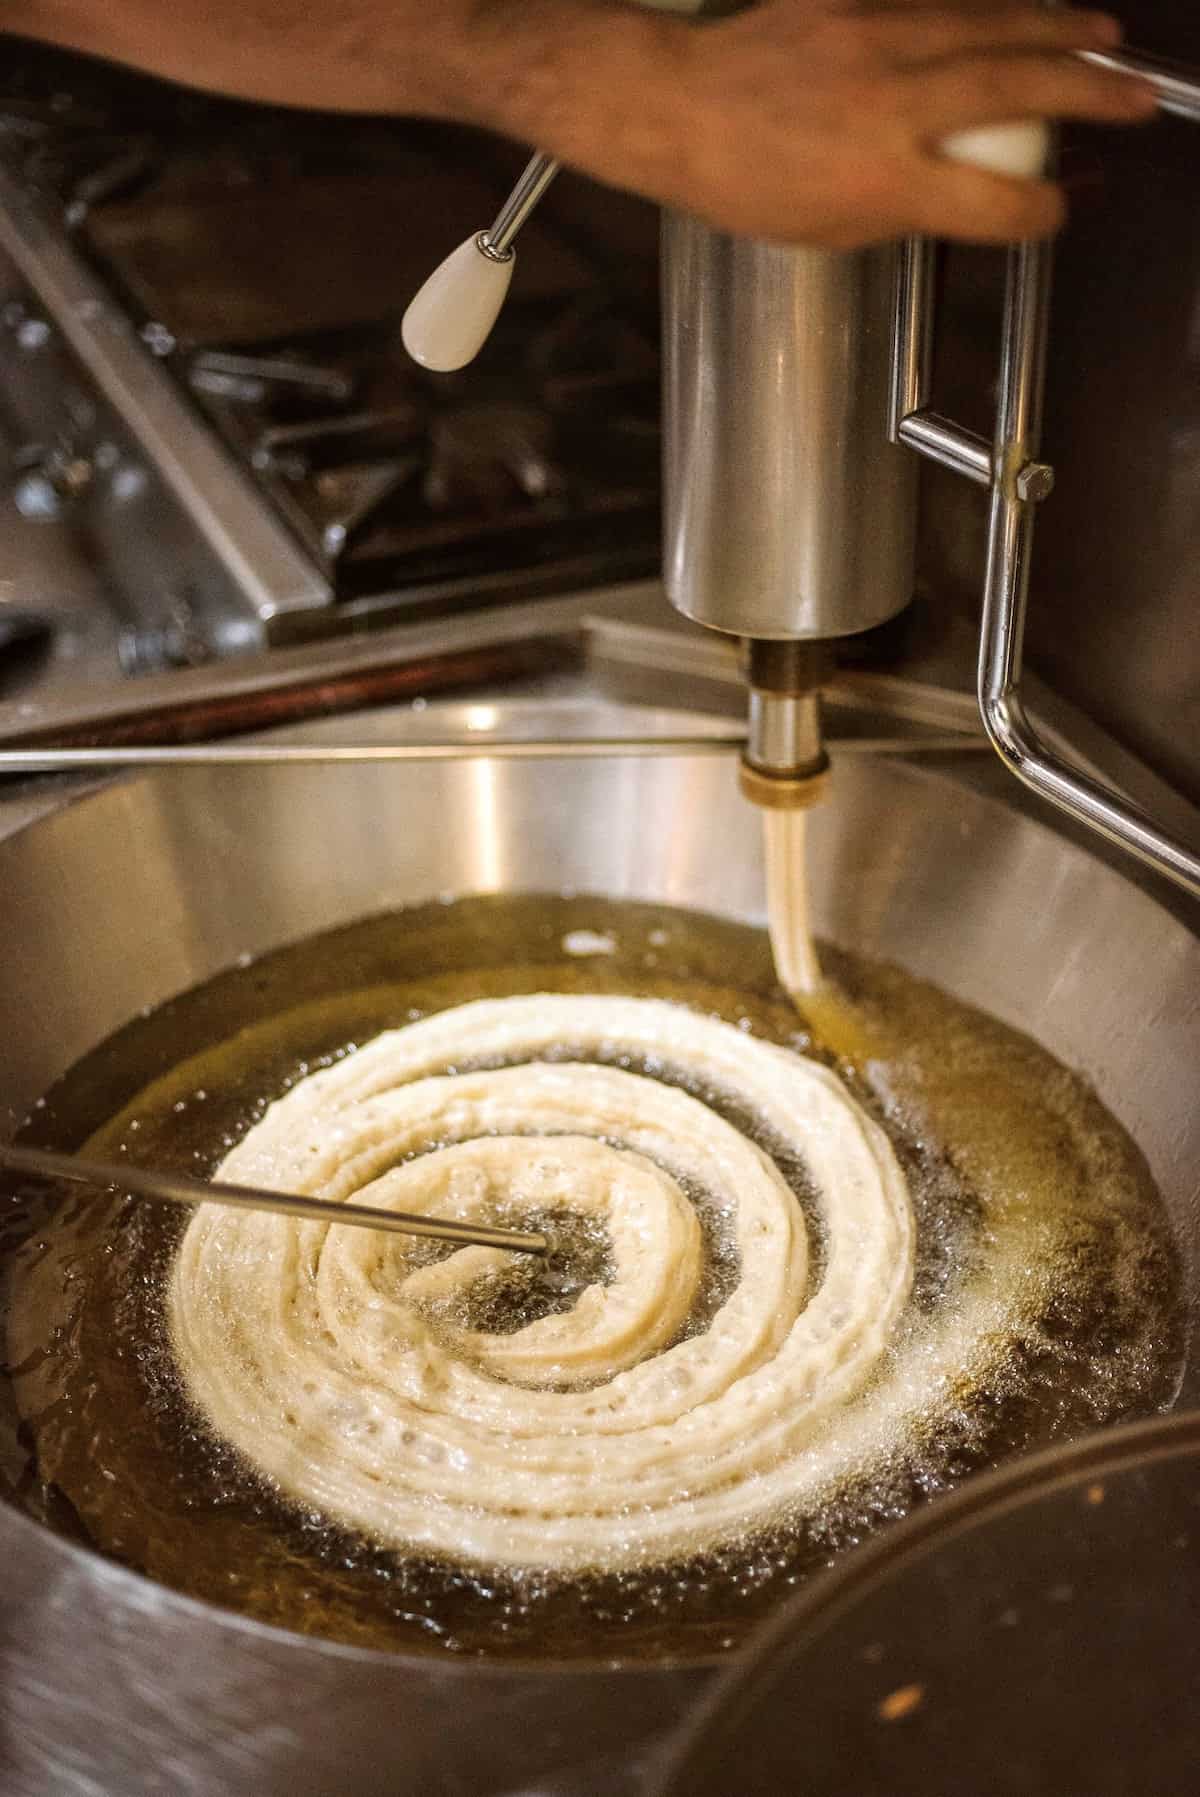 Spiral shaped churro dough being fried in a metal vat of olive oil.